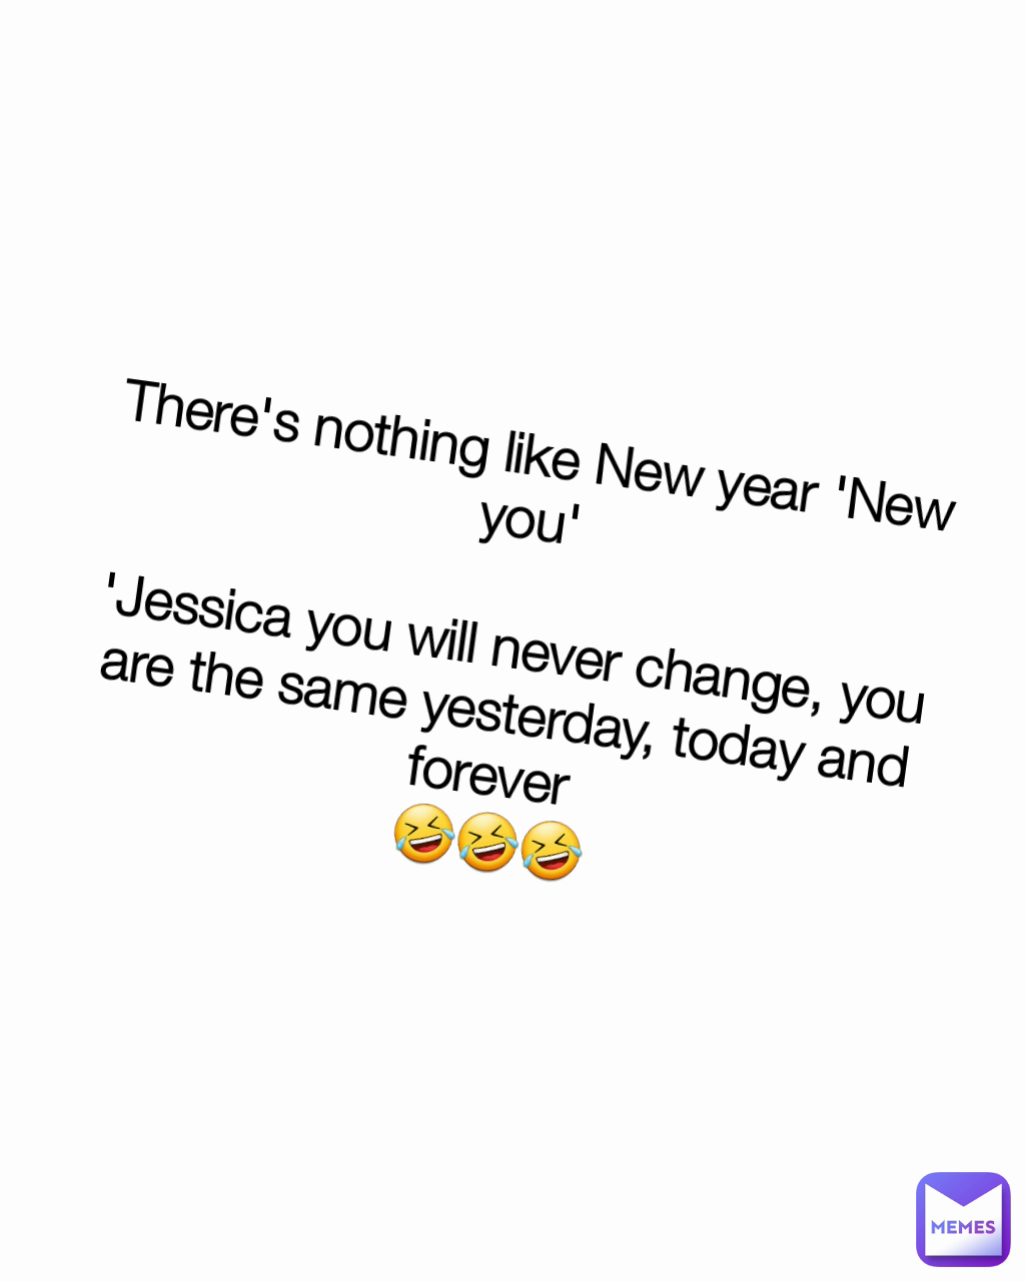 There's nothing like New year 'New you'

'Jessica you will never change, you are the same yesterday, today and forever 
🤣🤣🤣